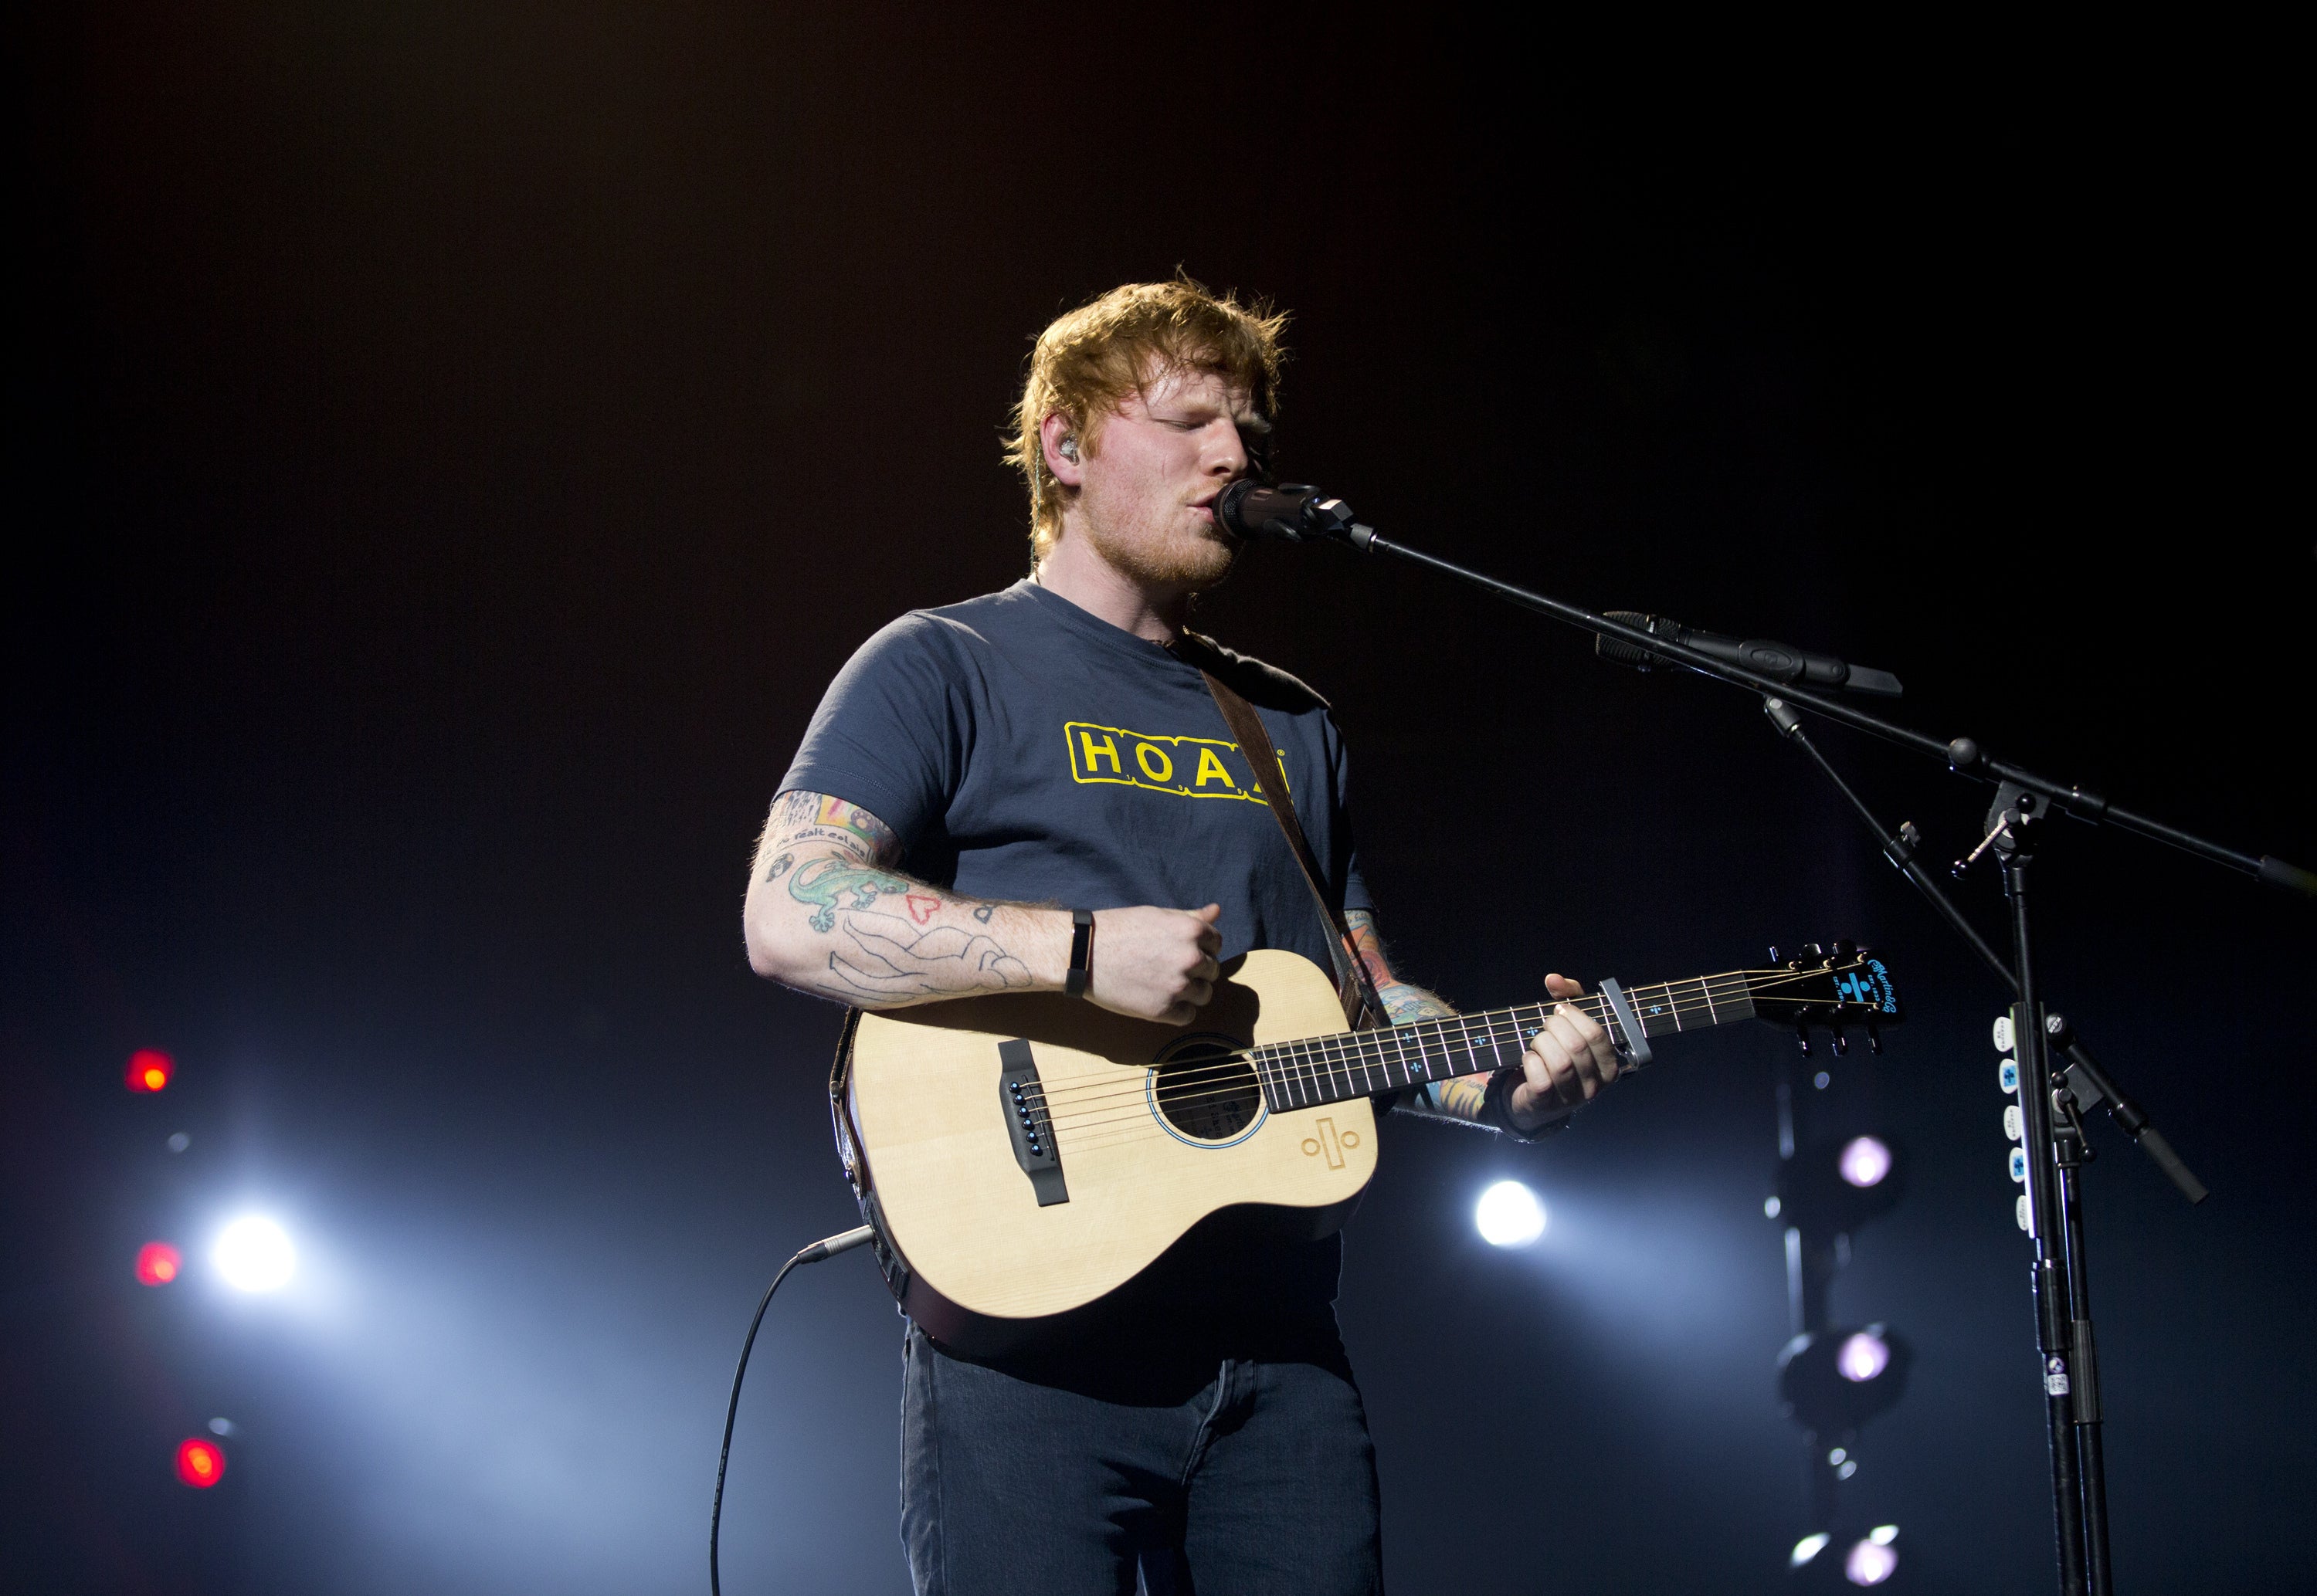 Ed Sheeran on stage during the Teenage Cancer Trust annual concert series, at the Royal Albert Hall, London, in 2017 (PA)